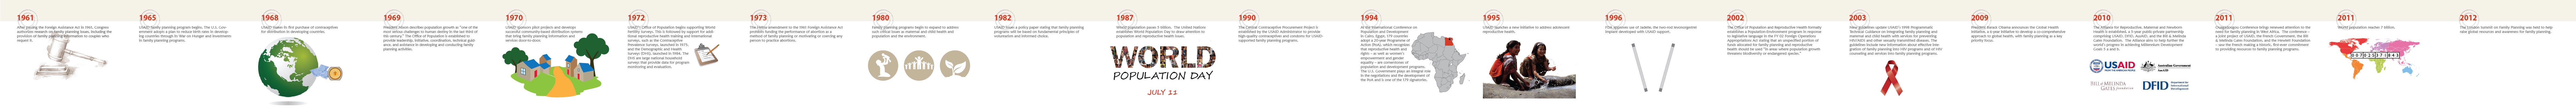 <br />
 1961: After passing the Foreign Assistance Act in 1961, Congress authorizes research on family planning issues, including the provision of family planning information to couples who request it. 
 1965: USAID family planning program begins. The U.S. Government adopts a plan to reduce birth rates in developing countries through its War on Hunger and investments in family planning programs.
 1968: USAID makes its first purchase of contraceptives for distribution in developing countries.
 1969: President Nixon describes population growth as “one of the most serious challenges to human destiny in the last third of this century.” The Office of Population is established to provide leadership, initiative, coordination, technical guidance, and assistance in developing and conducting family planning activities.
 1970s: USAID sponsors pilot projects and develops successful community-based distribution systems that bring family planning information and services door-to-door.
 1972: USAID’s Office of Population begins supporting World Fertility Surveys. This is followed by support for additional reproductive health training and international surveys, such as the Contraceptive Prevalence Surveys, launched in 1975, and the Demographic and Health Surveys (DHS), launched in 1984. The DHS are large national household surveys that provide data for program monitoring and evaluation.
 1973: The Helms amendment to the 1961 Foreign Assistance Act prohibits funding the performance of abortion as a method of family planning or motivating or coercing any person to practice abortions.
 1980s: Family planning programs expand to address such critical issues as maternal and child health and population and the environment.
 1982: USAID issues a policy paper stating that family planning programs will be based on fundamental principles of voluntarism and informed choice.
 1987: World population passes 5 billion. The United Nations establishes World Population Day to draw attention to population and reproductive health issues.
 1990: The Central Contraceptive Procurement Project is established by the USAID Administrator to provide high-quality contraceptives and condoms for USAID-supported family planning programs. 
 1994: At the International Conference on Population and Development in Cairo, Egypt, 179 countries adopt a 20-year Programme of Action (PoA), which recognizes that reproductive health and rights – as well as women’s empowerment and gender equality – are cornerstones of population and development programs. The U.S. Government plays an integral role in the negotiations and the development of the PoA and is one of the 179 signatories.
 1995: USAID launches a new initiative to address adolescent reproductive health. 
 1996: FDA approves use of Jadelle, the two-rod levonorgestrel implant developed with USAID support.
 2002: The Office of Population and Reproductive Health formally establishes a Population-Environment program in response to legislative language in the FY 02 Foreign Operations Appropriations Act stating that an unspecified portion of funds allocated for family planning and reproductive health should be used “in areas where population growth threatens biodiversity or endangered species.”
 2003: New guidelines update USAID’s 1998 Programmatic Technical Guidance on integrating family planning and maternal and child health with services for preventing HIV/AIDS and other sexually transmitted diseases. The guidelines include new information about effective integration of family planning into HIV programs and of HIV counseling and services into family planning programs.
 2009: President Barack Obama announces the Global Health Initiative, a 6-year initiative to develop a co-comprehensive approach to global health, with family planning as a key priority focus. 
 2010: The Alliance for Reproductive, Maternal and Newborn Health is established, a 5-year public-private partnership comprising USAID, DFID, AusAID, and the Bill & Melinda Gates Foundation. The Alliance aims to help further the world’s progress in achieving Millennium Development Goals 5 a and b. 
 2011: Ouagadougou Conference brings renewed attention to the need for family planning in West Africa. The conference – a joint project of USAID, the French Government, the Bill & Melinda Gates Foundation, and the Hewlett Foundation – saw the French making a historic, first-ever commitment to providing resources to family planning programs.
 2011: World population reaches 7 billion.
 2012: The London Summit on Family Planning was held to help raise global resources and awareness for family planning.